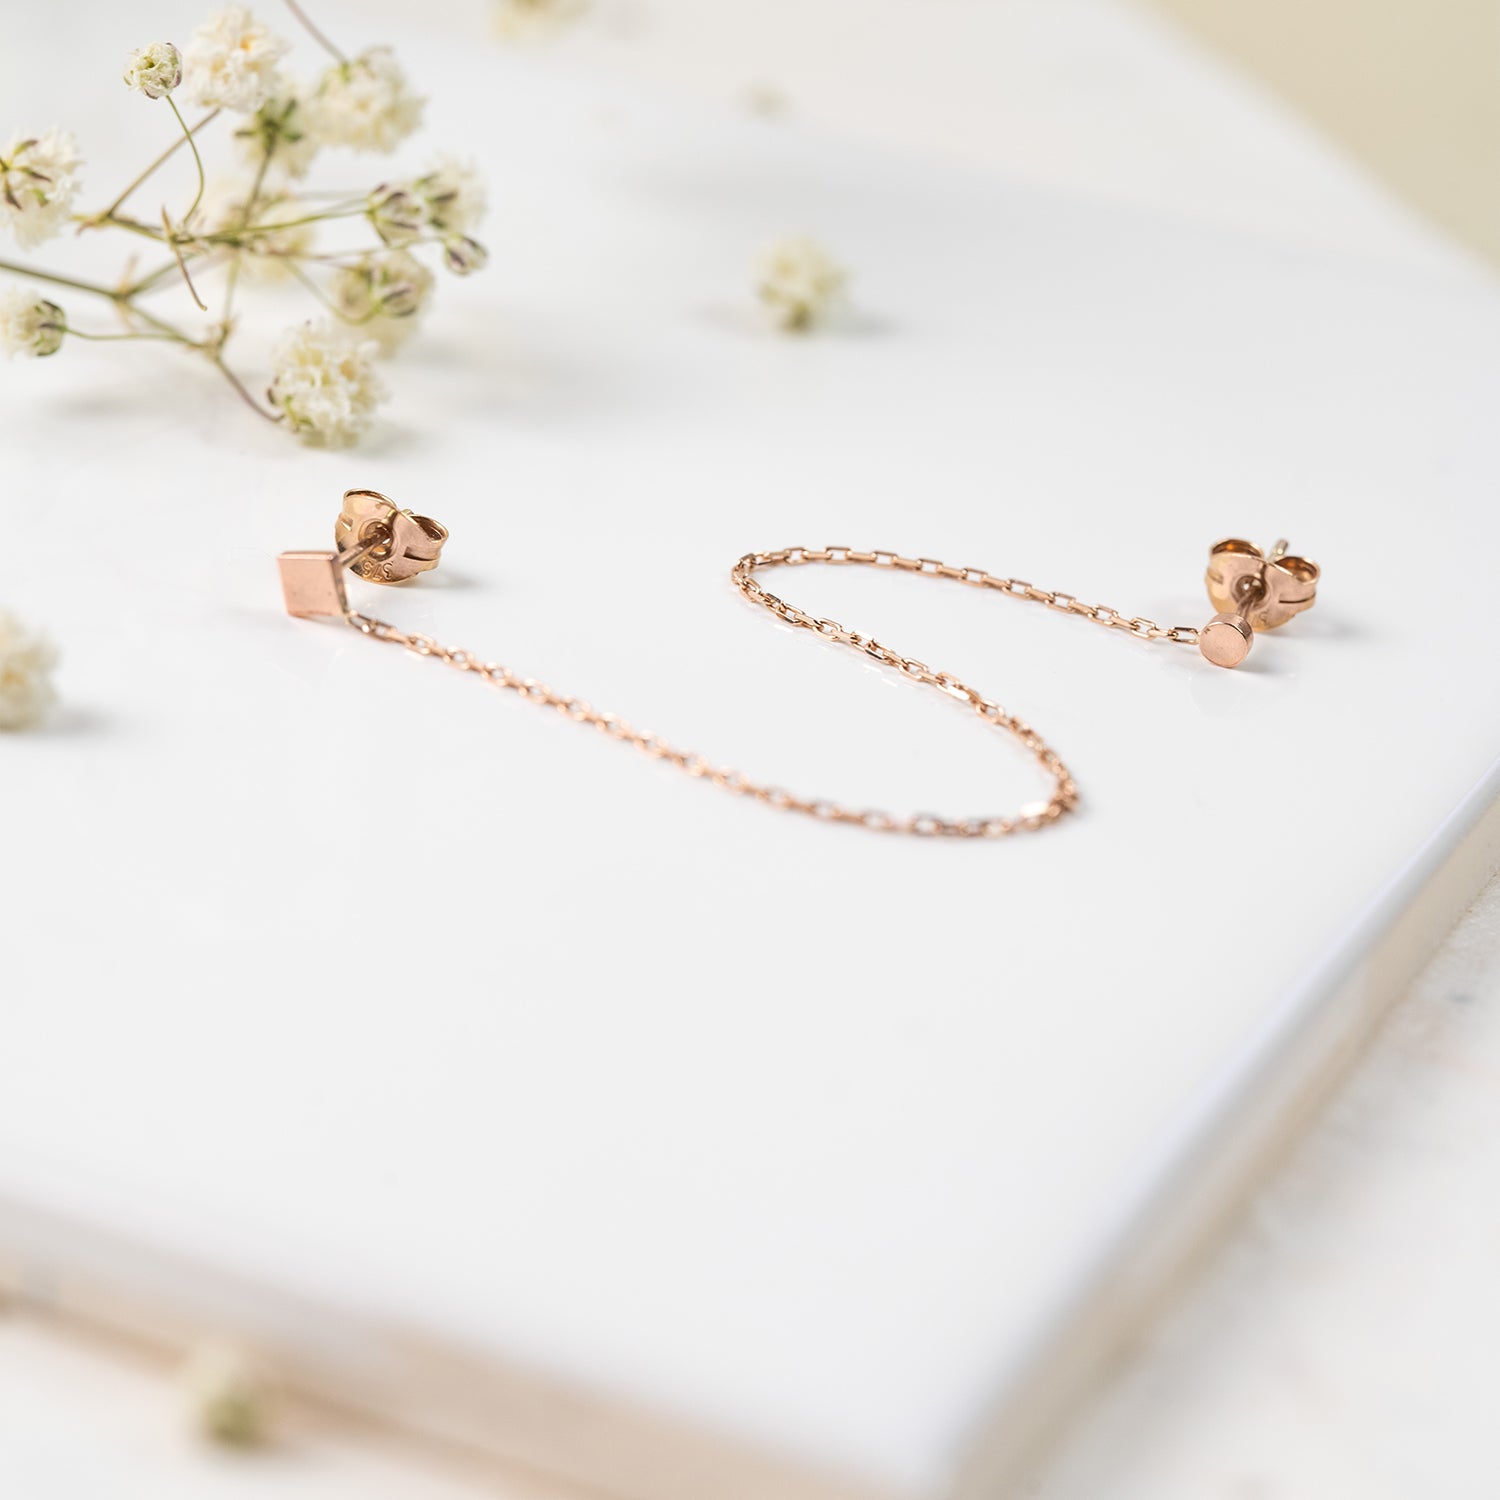 9ct rose gold double stud earring with a round and a square stud.